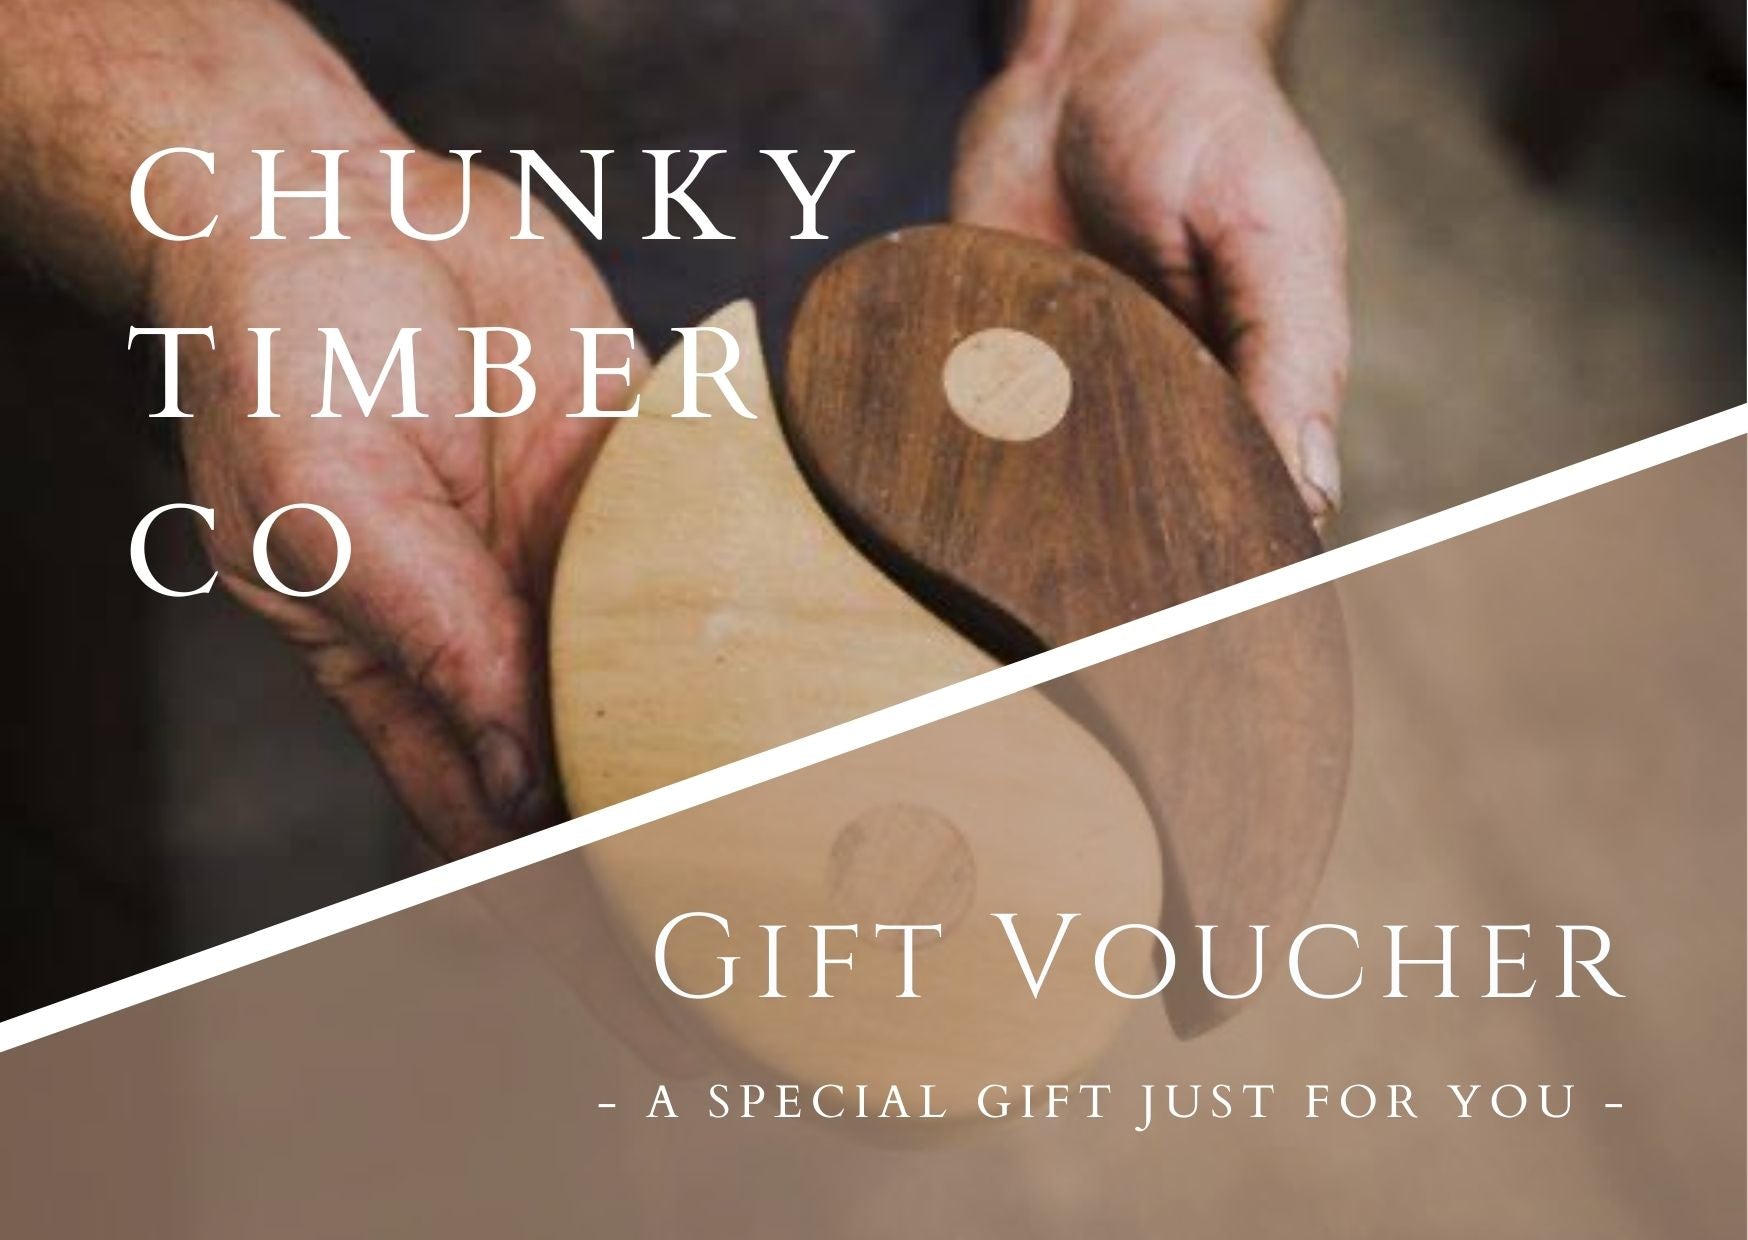 Chunky Timber Co Gift Voucher